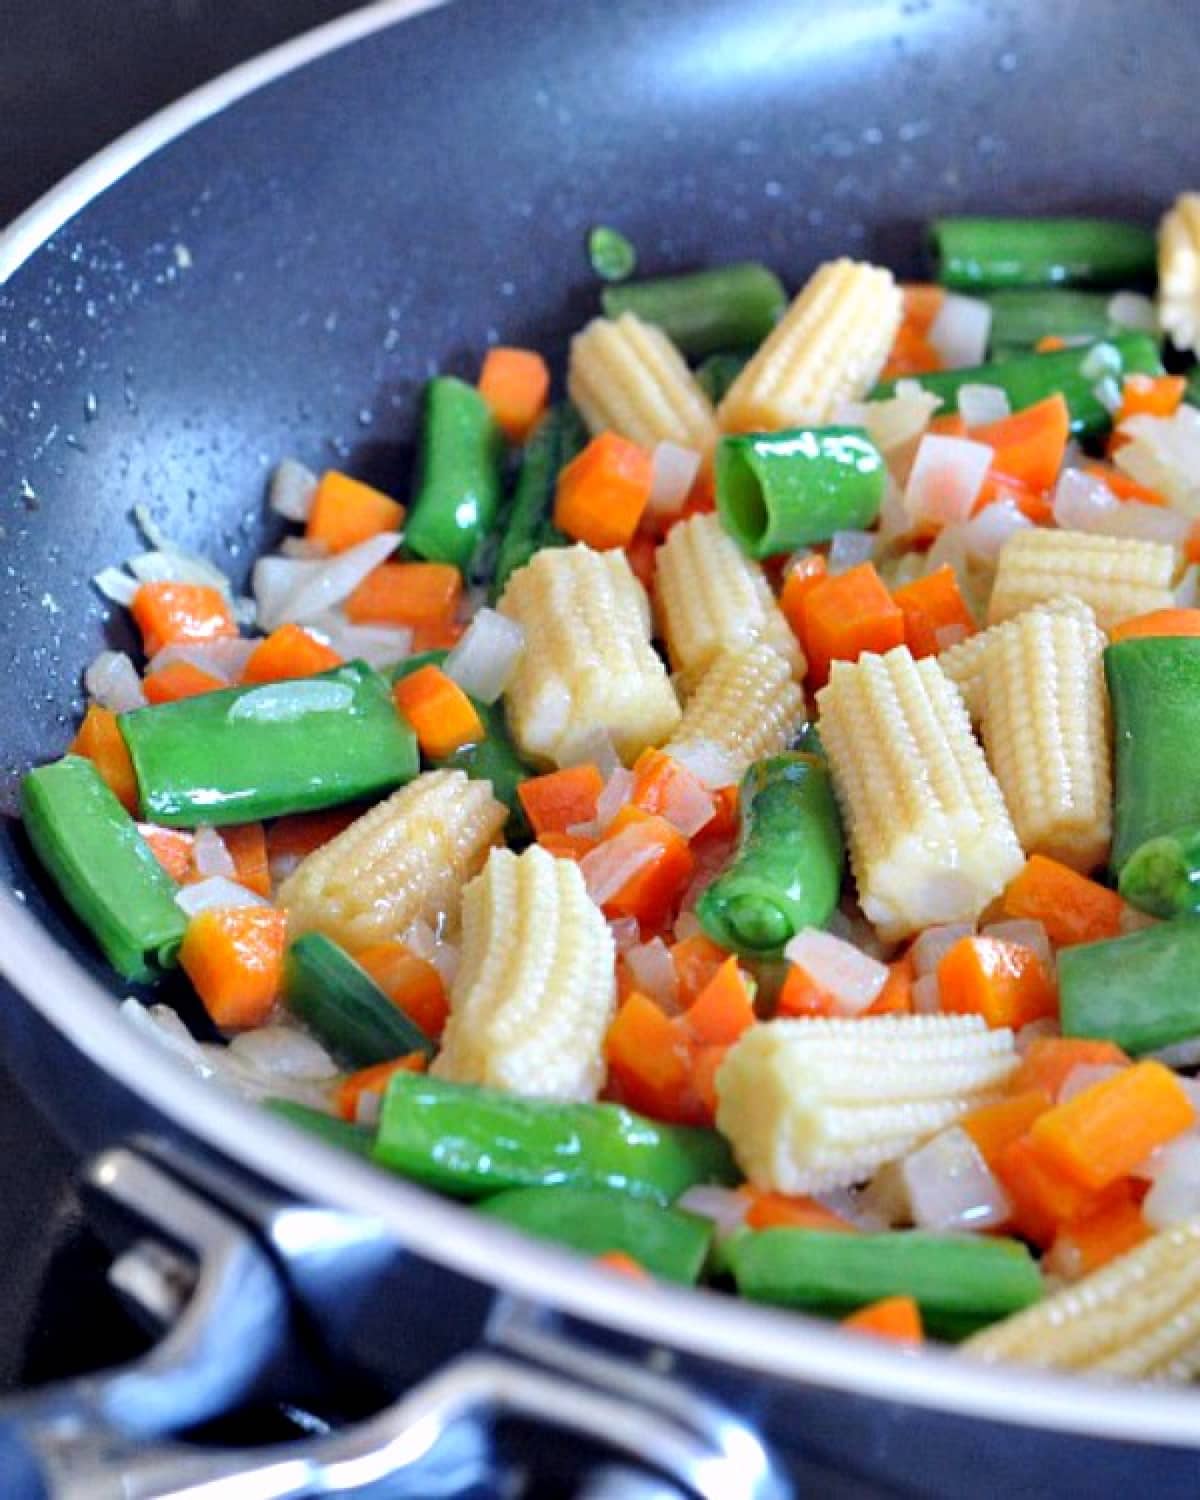 Sautéed vegetables in a skillet for veggie fried rice: diced onion, pea shoots, baby corn, diced carrot.